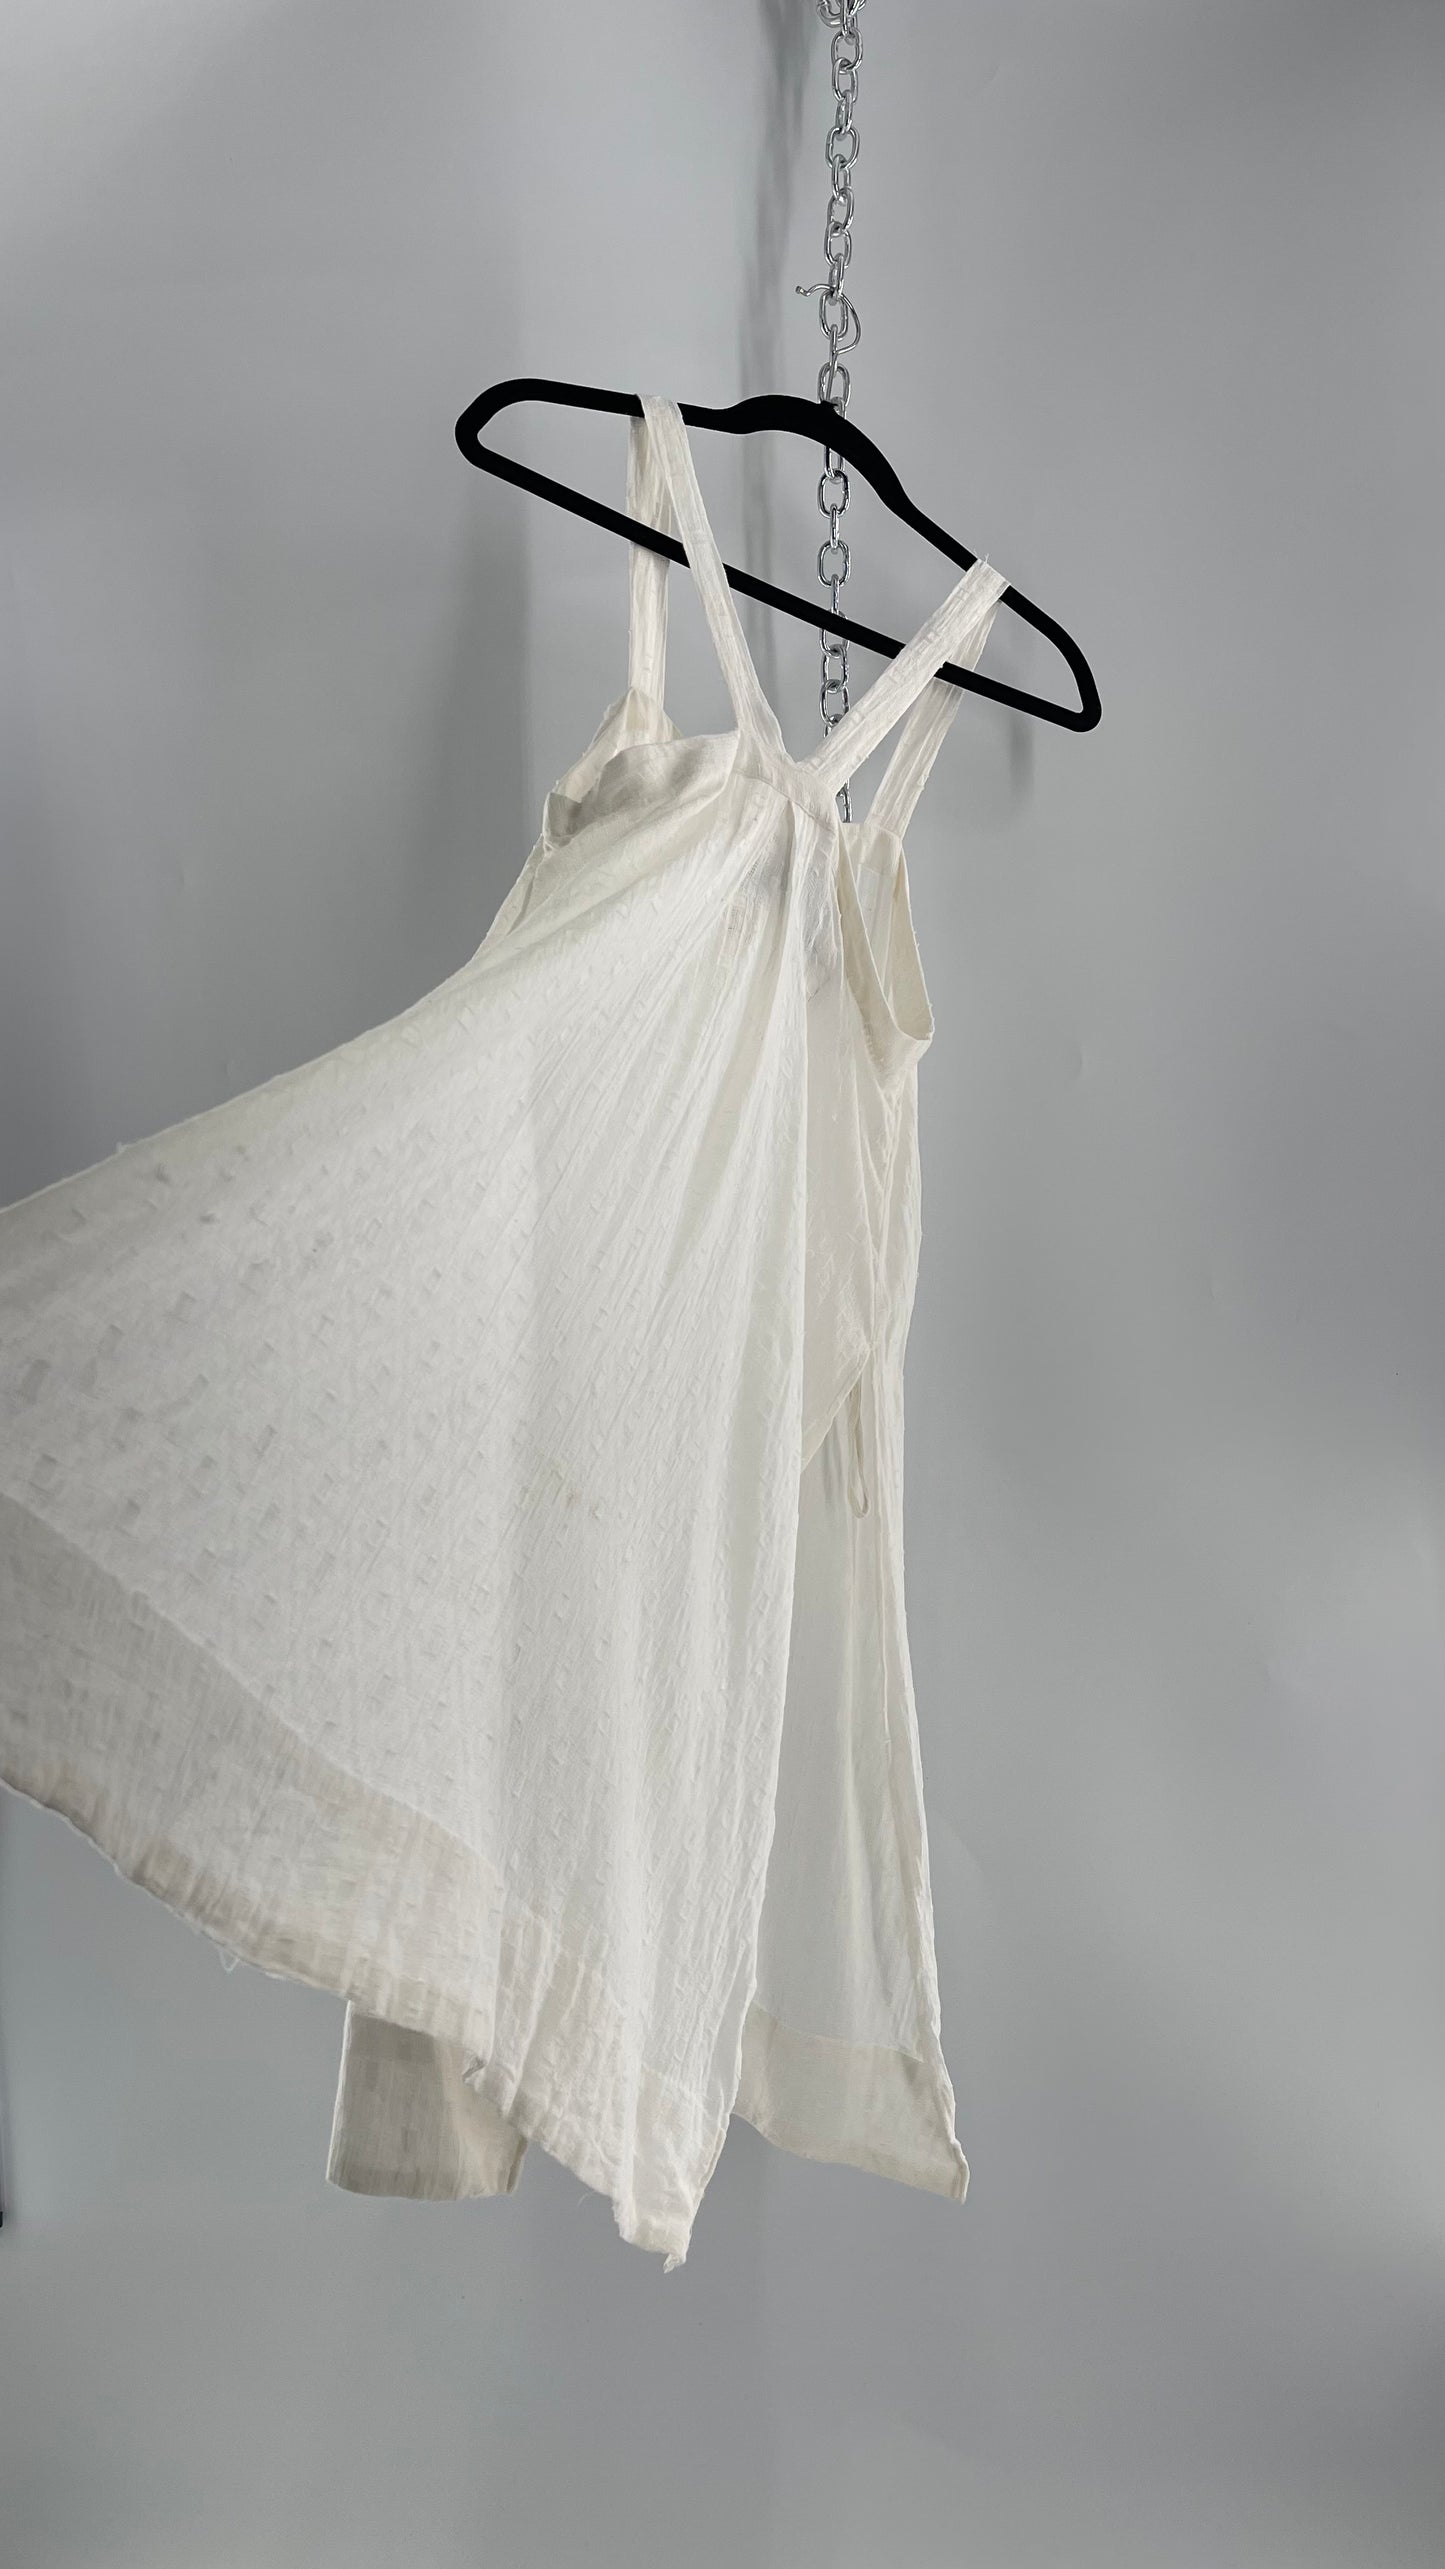 Anthropologie White Sweeping and Vented Button Front Tank (Large)